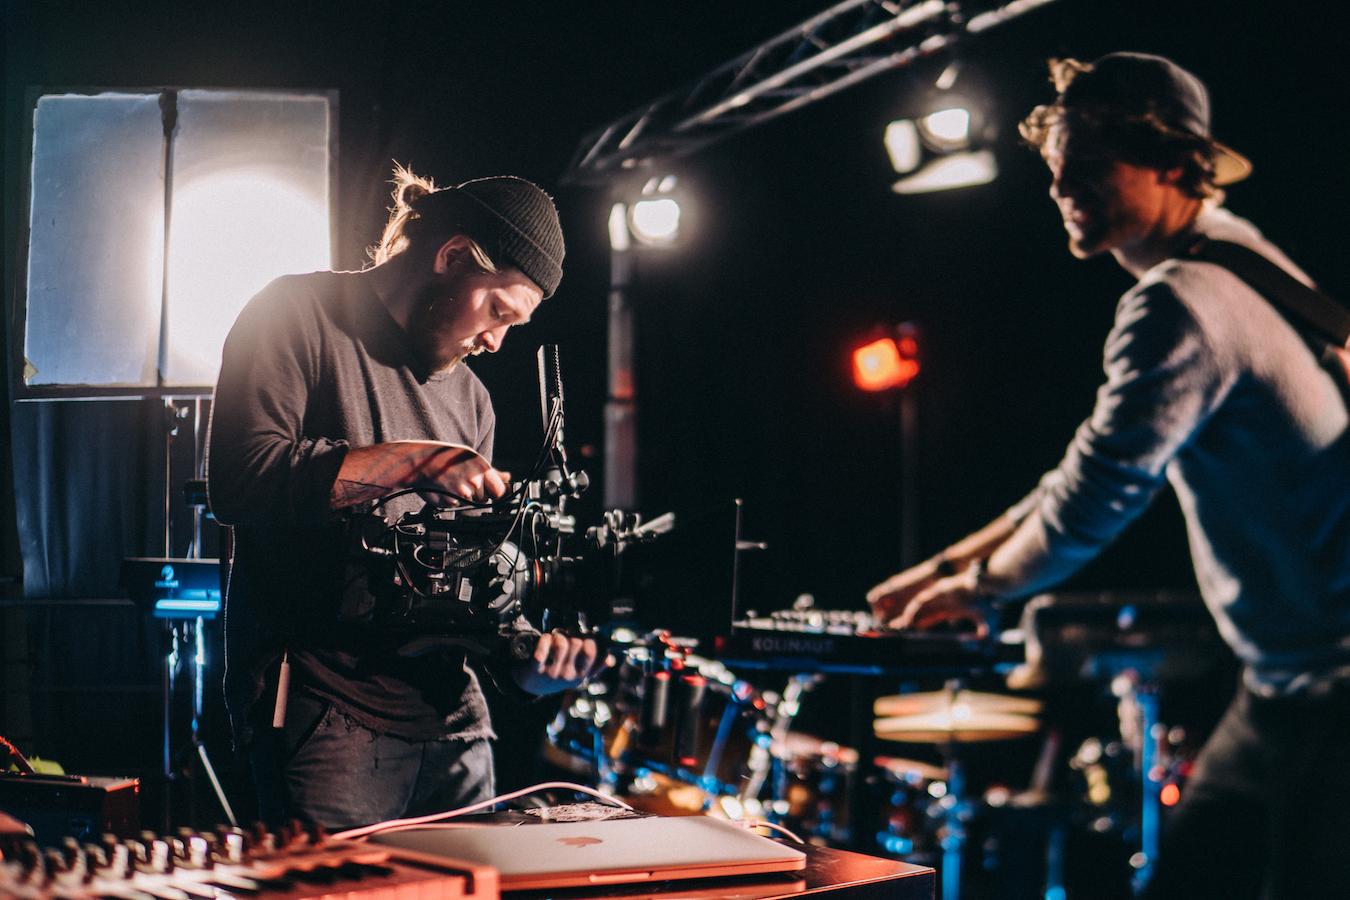 Technical knowledge is just as important for a director of photography to possess